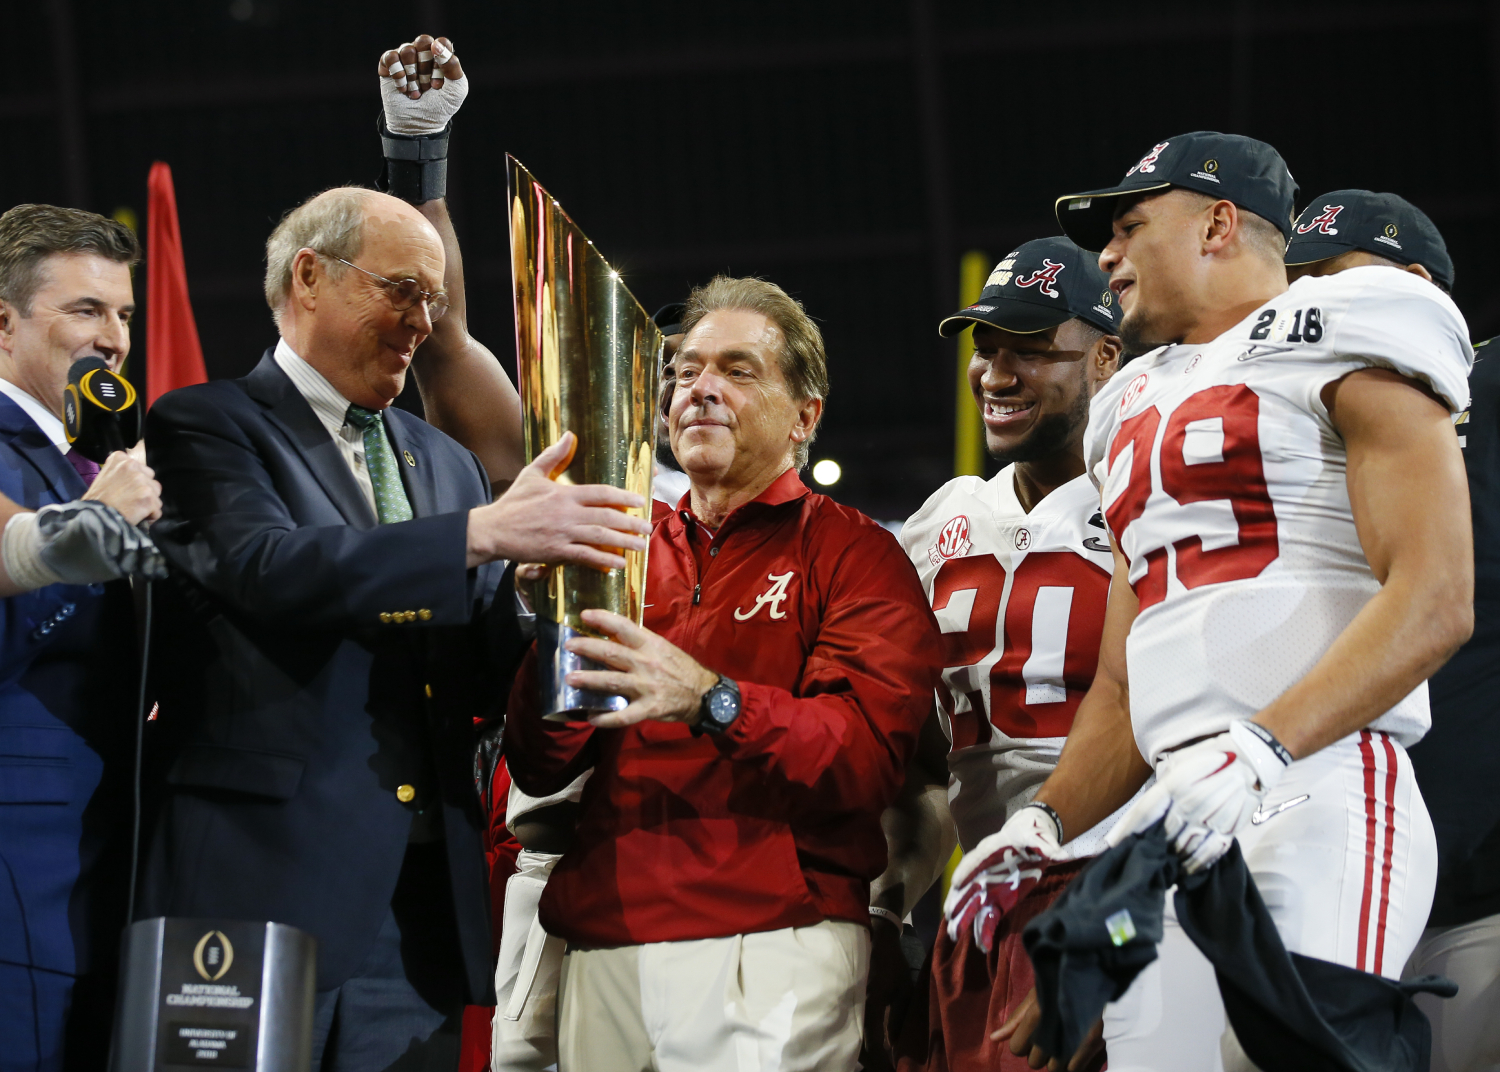 The Alabama Crimson Tide have one of the most dominant programs in college football. So, how many national championships have they won?